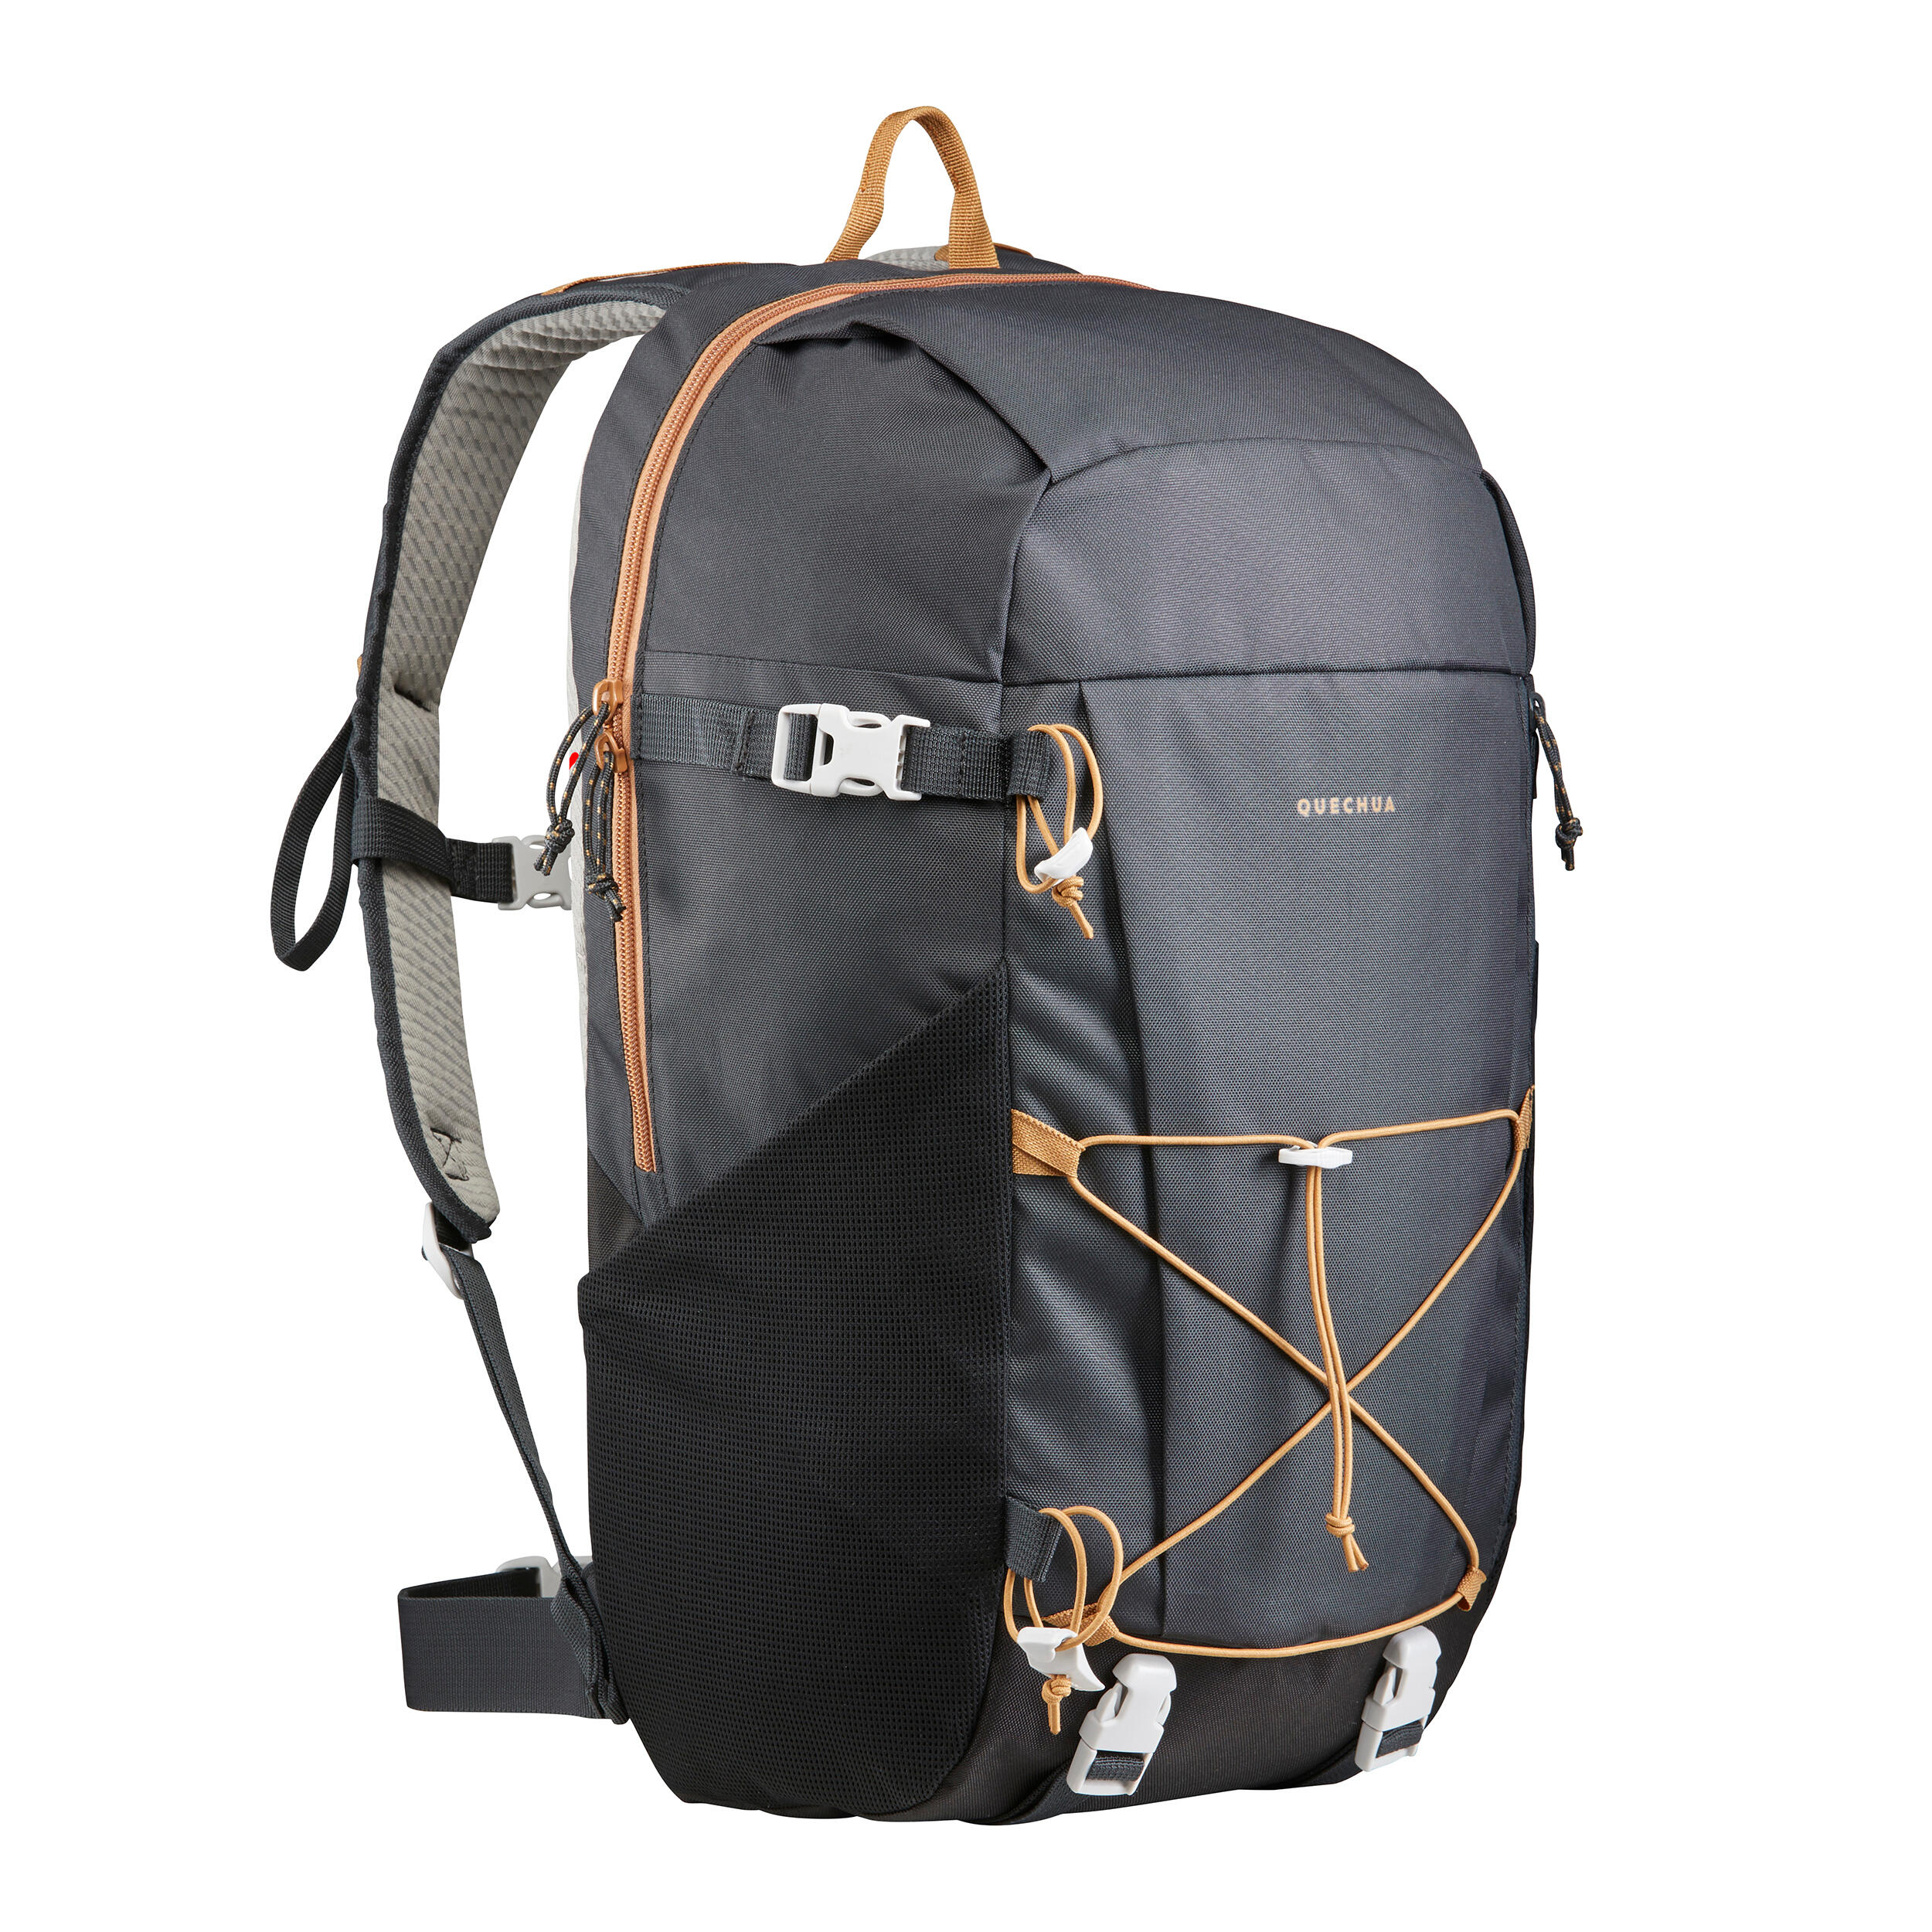 Quechua Arpenaz 10L Backpack | Updated design - YouTube